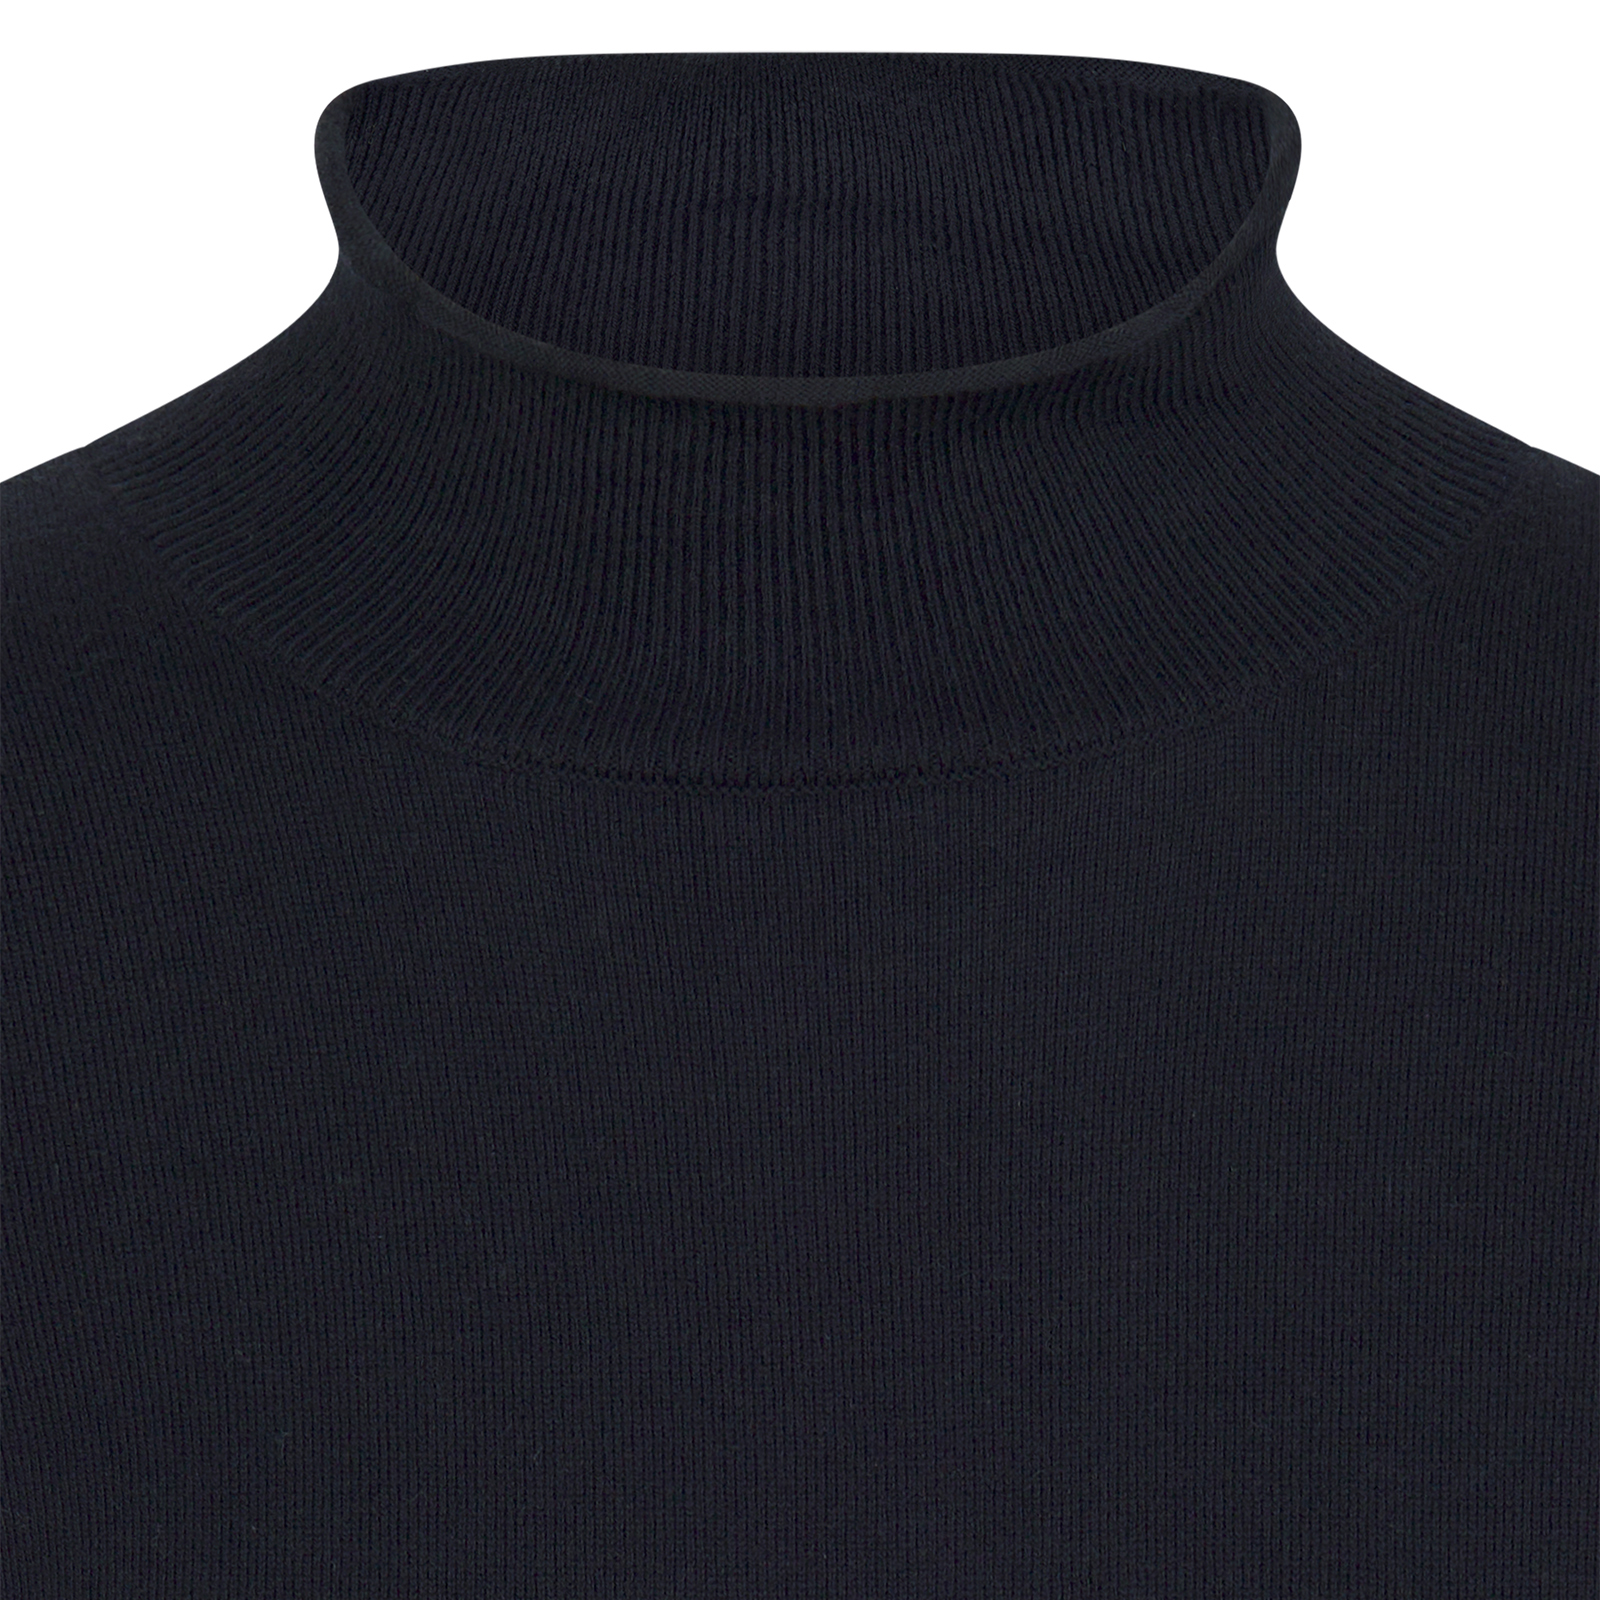 Ladies' knitted golf sweater in sustainable cotton with cashmere